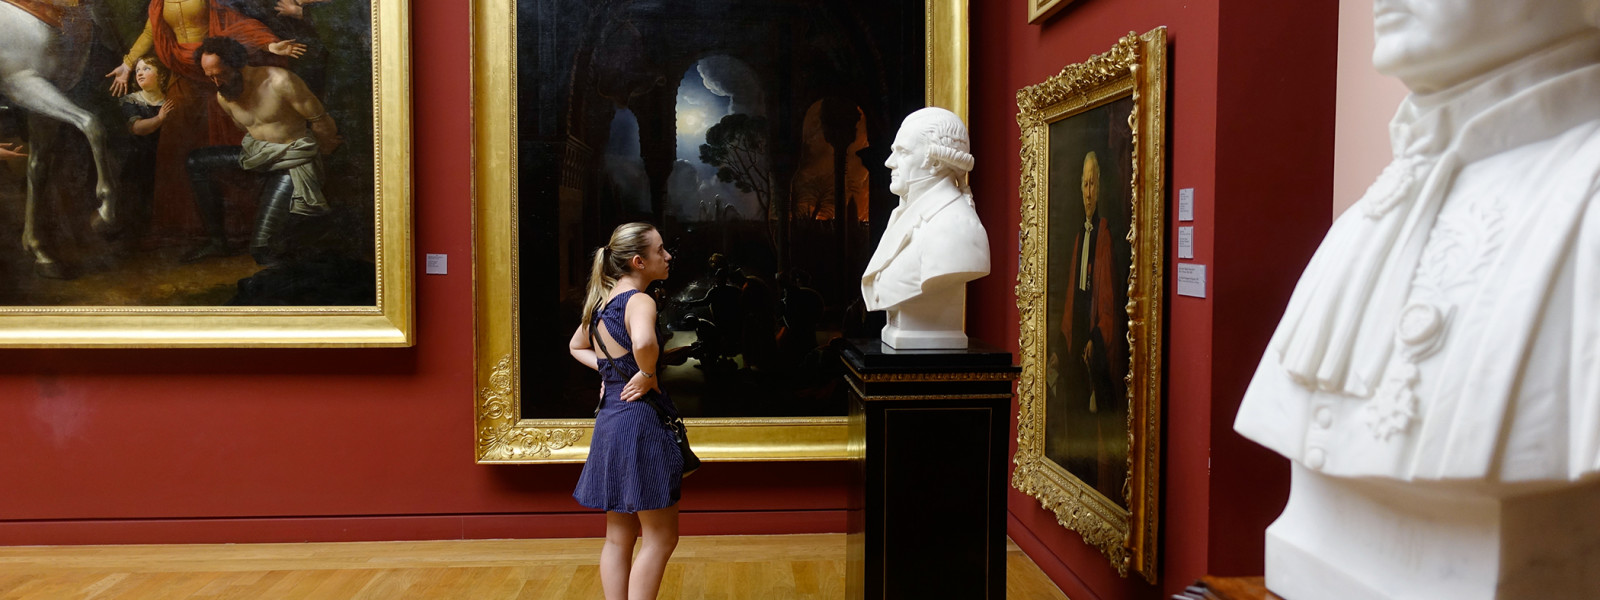 A student stands in a gallery and studies a sculpture while surrounded by paintings.